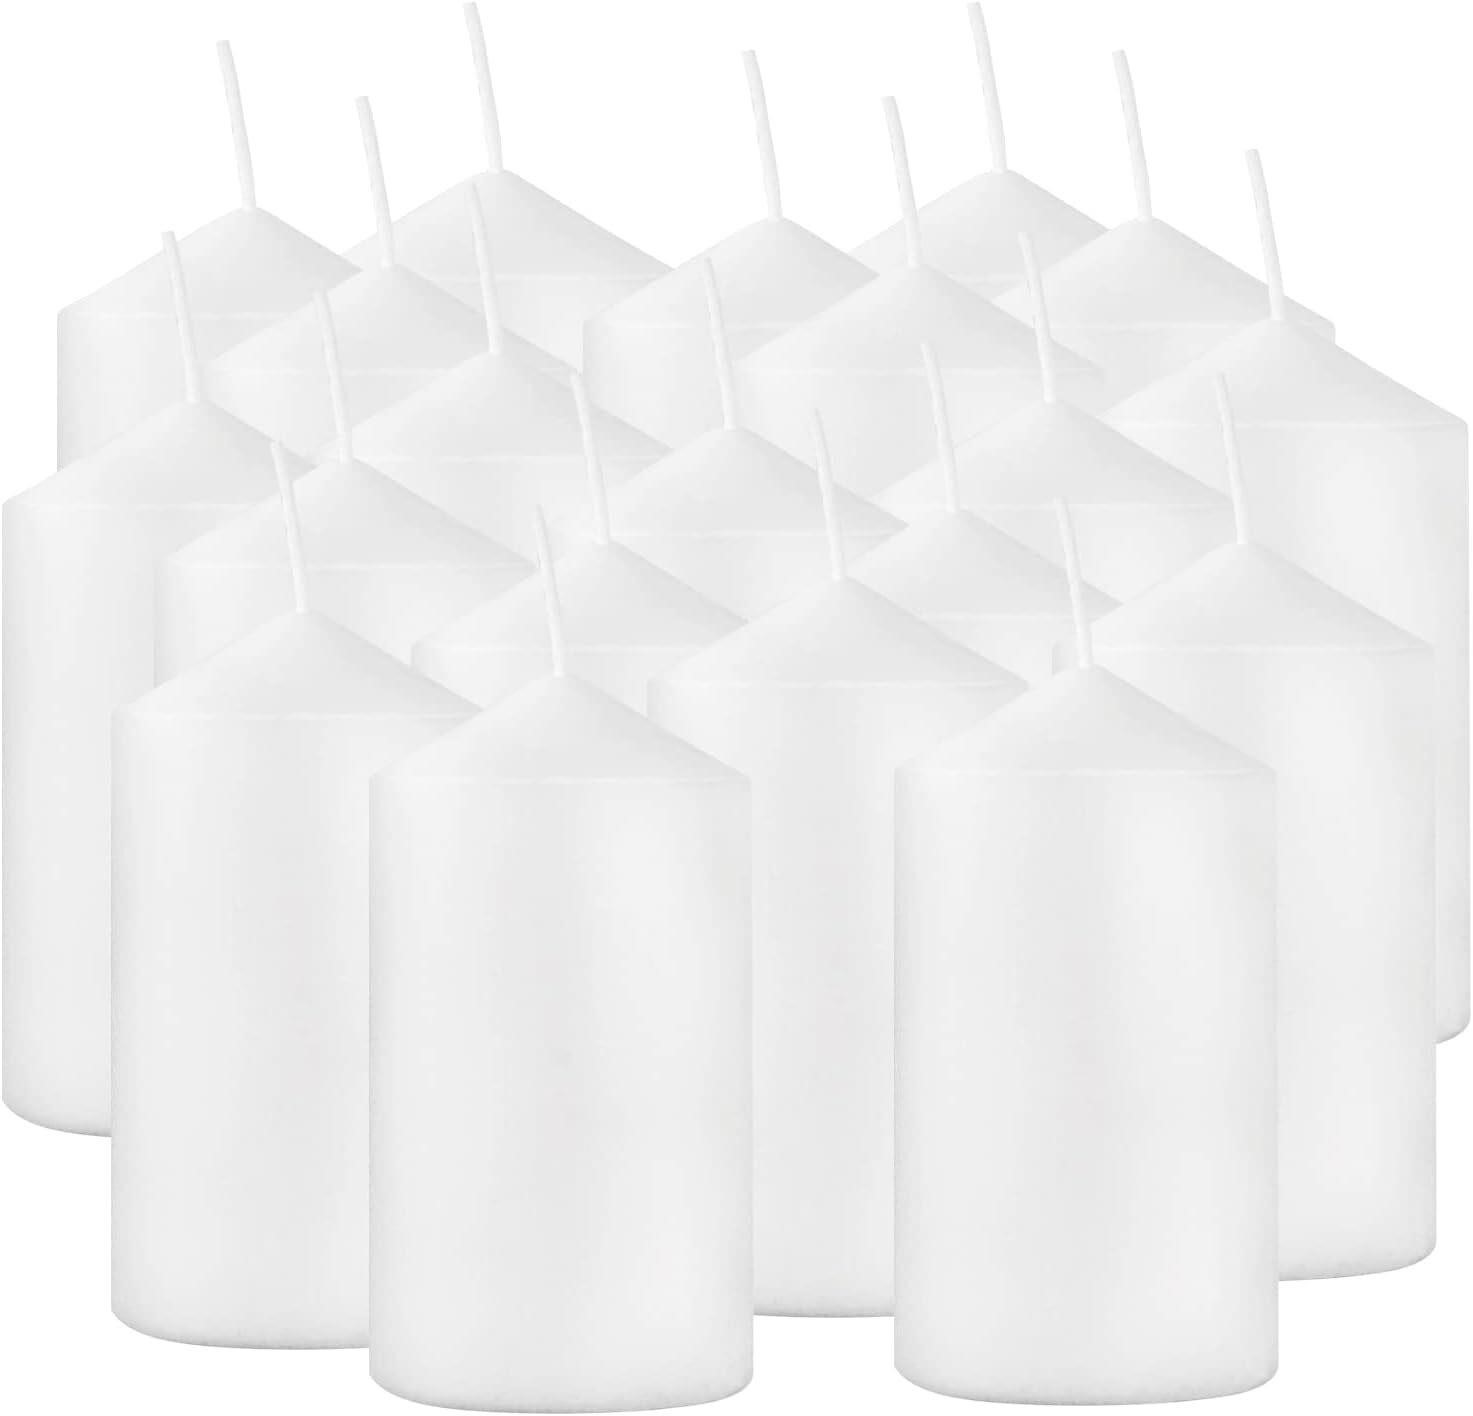 Set of 20, 2x4 White Pillar Candles, Unscented